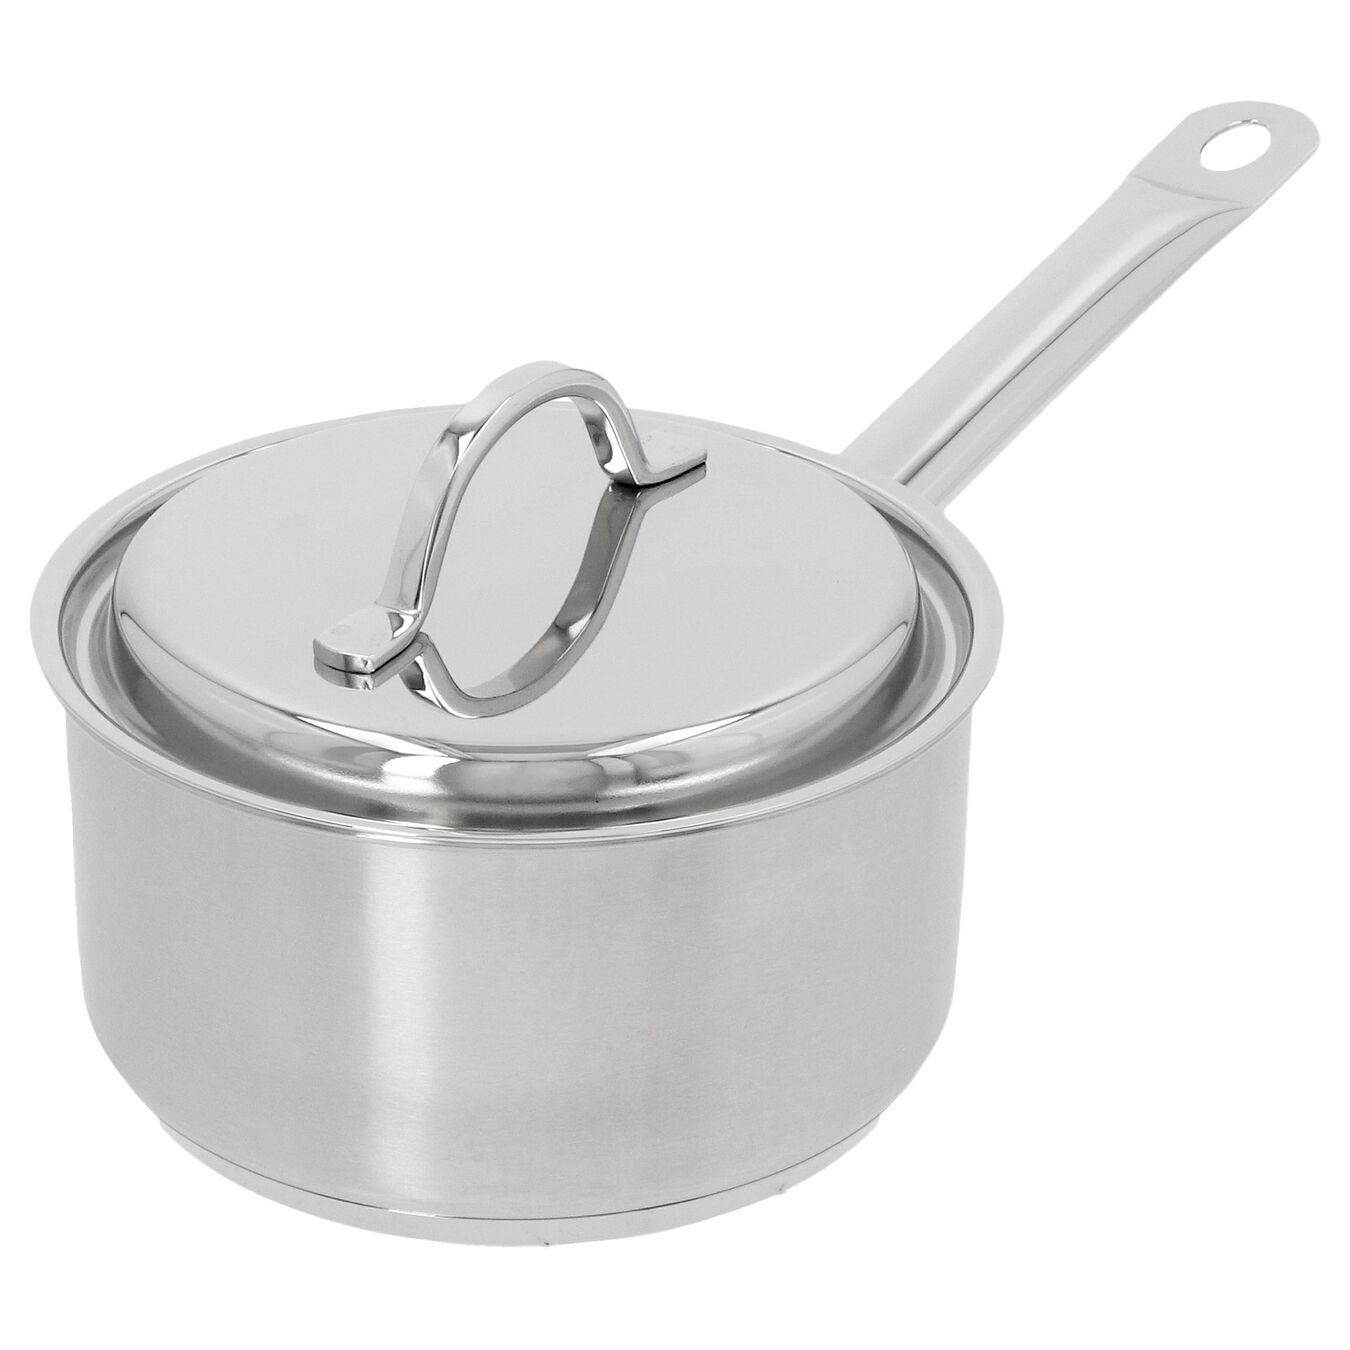 16 cm 18/10 Stainless Steel Saucepan with lid silver,,large 4